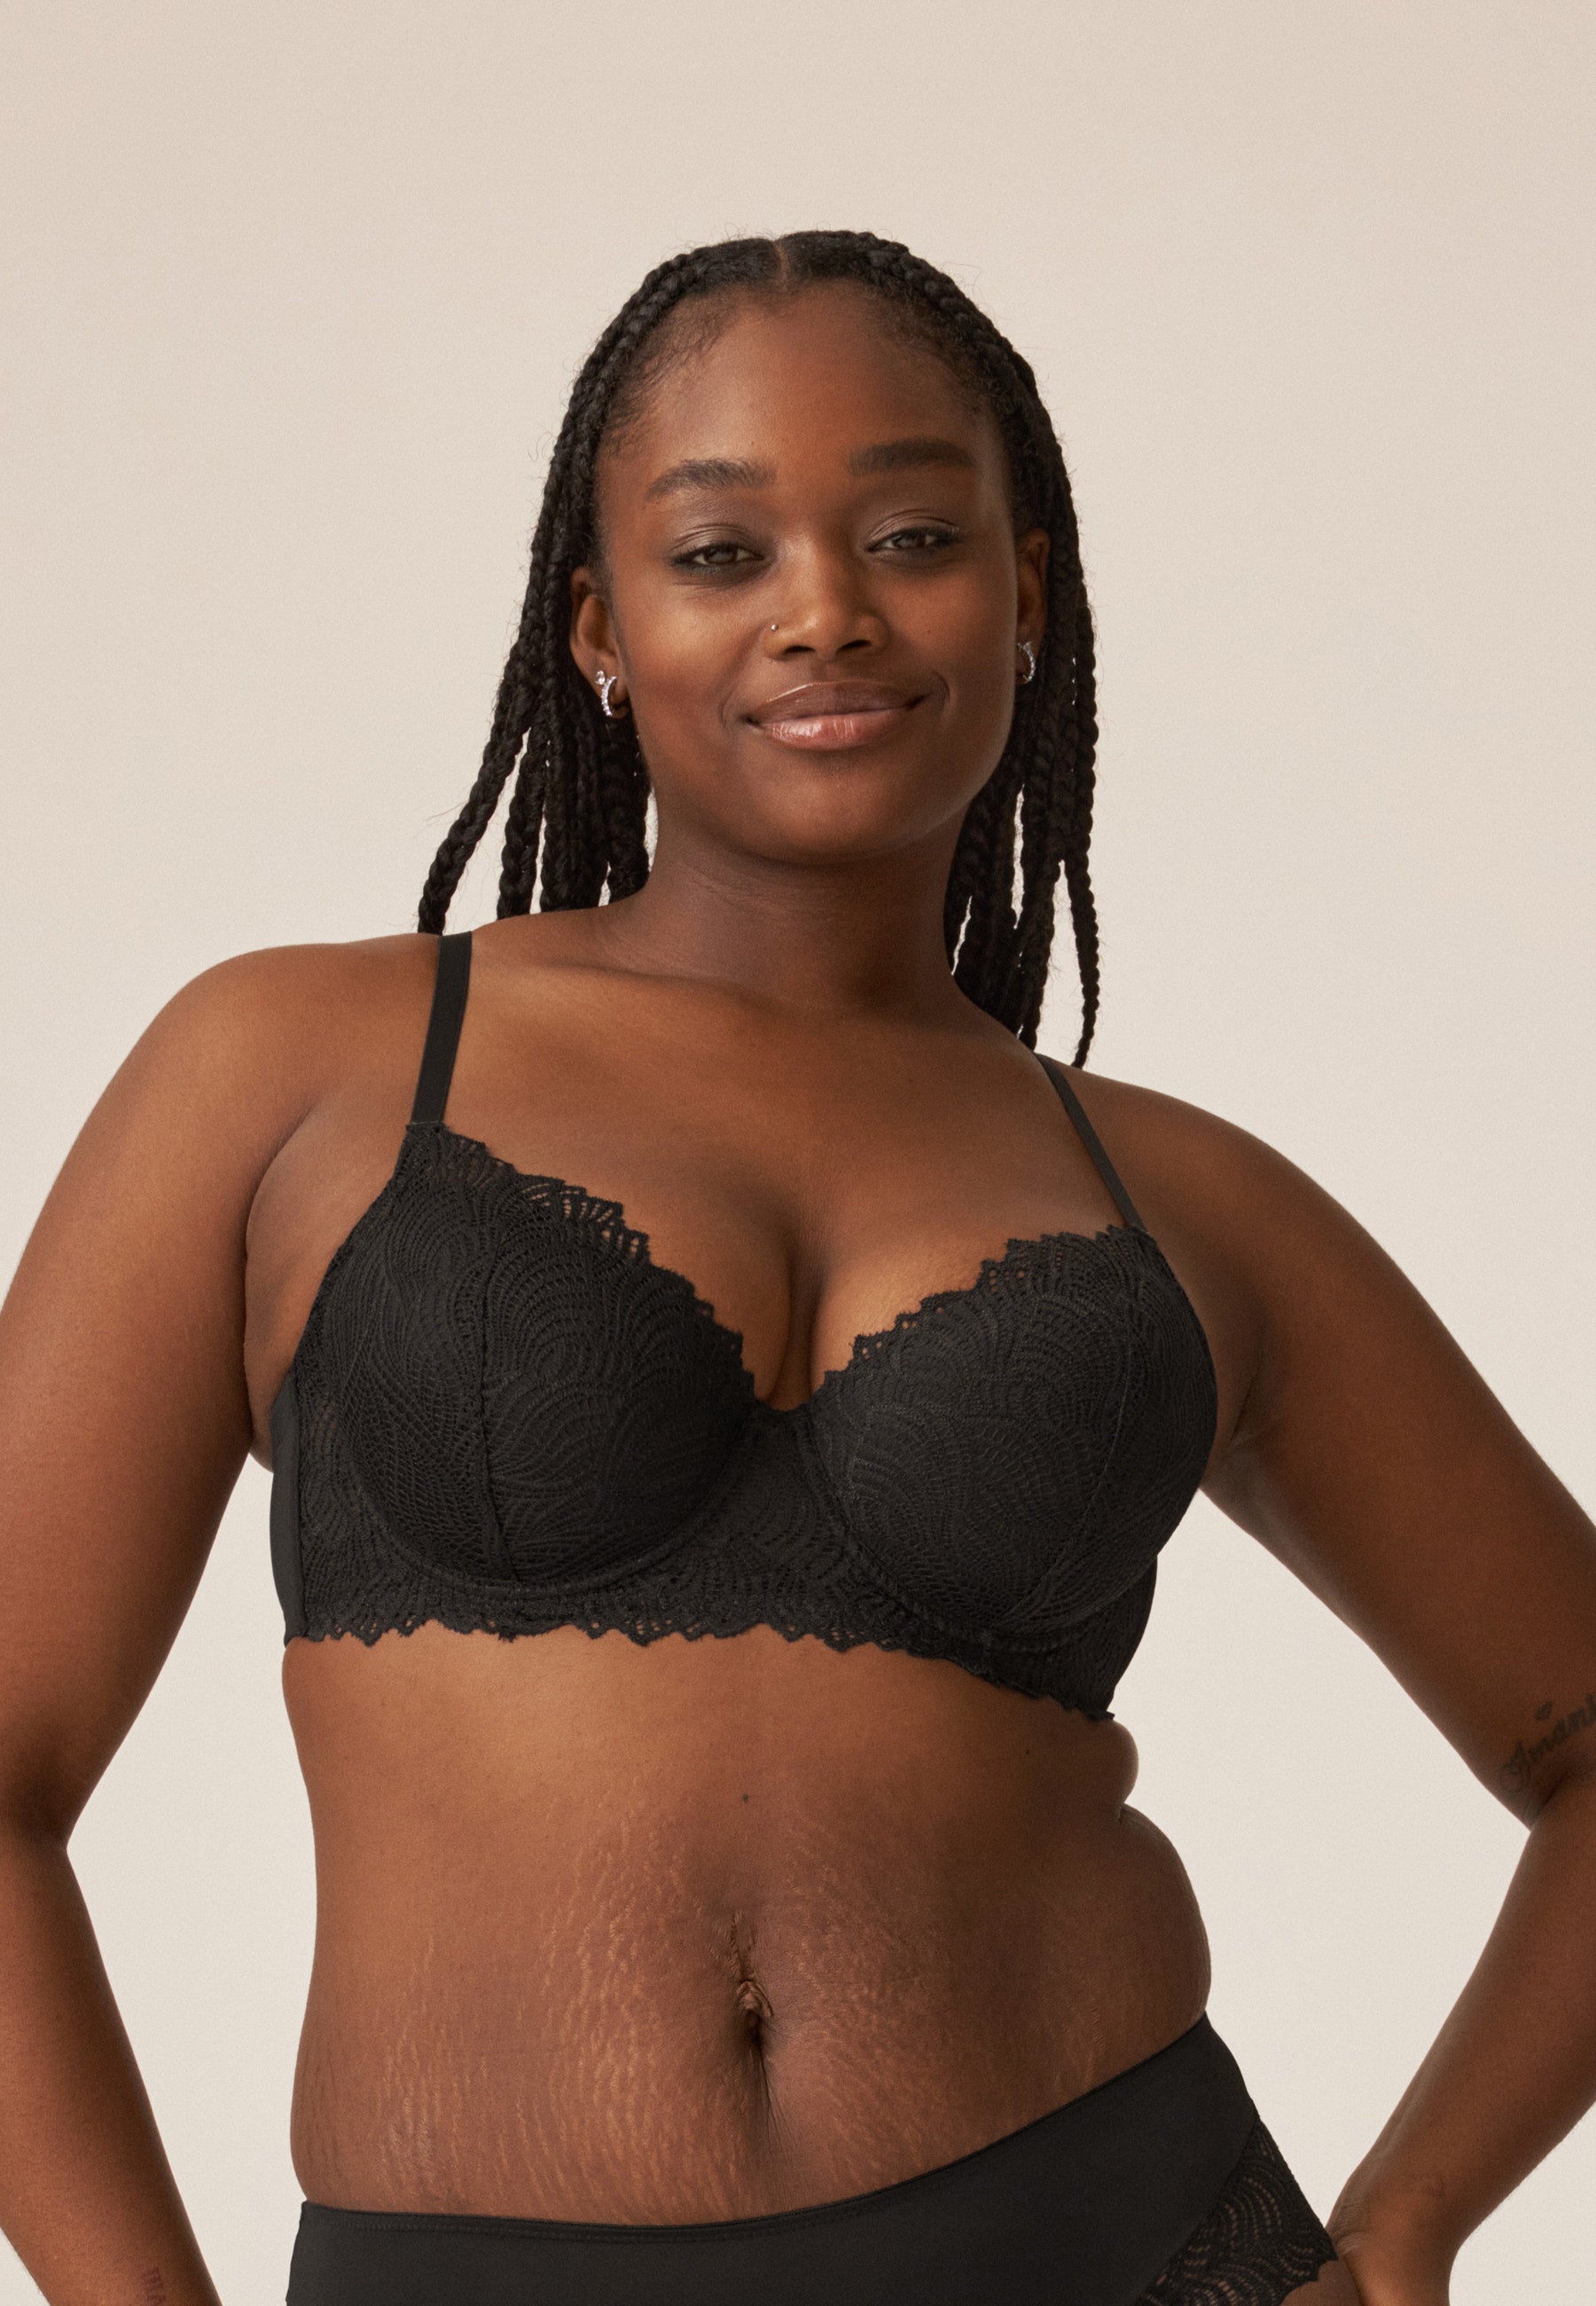 Underwired Bra with Lace Cup - Ecru